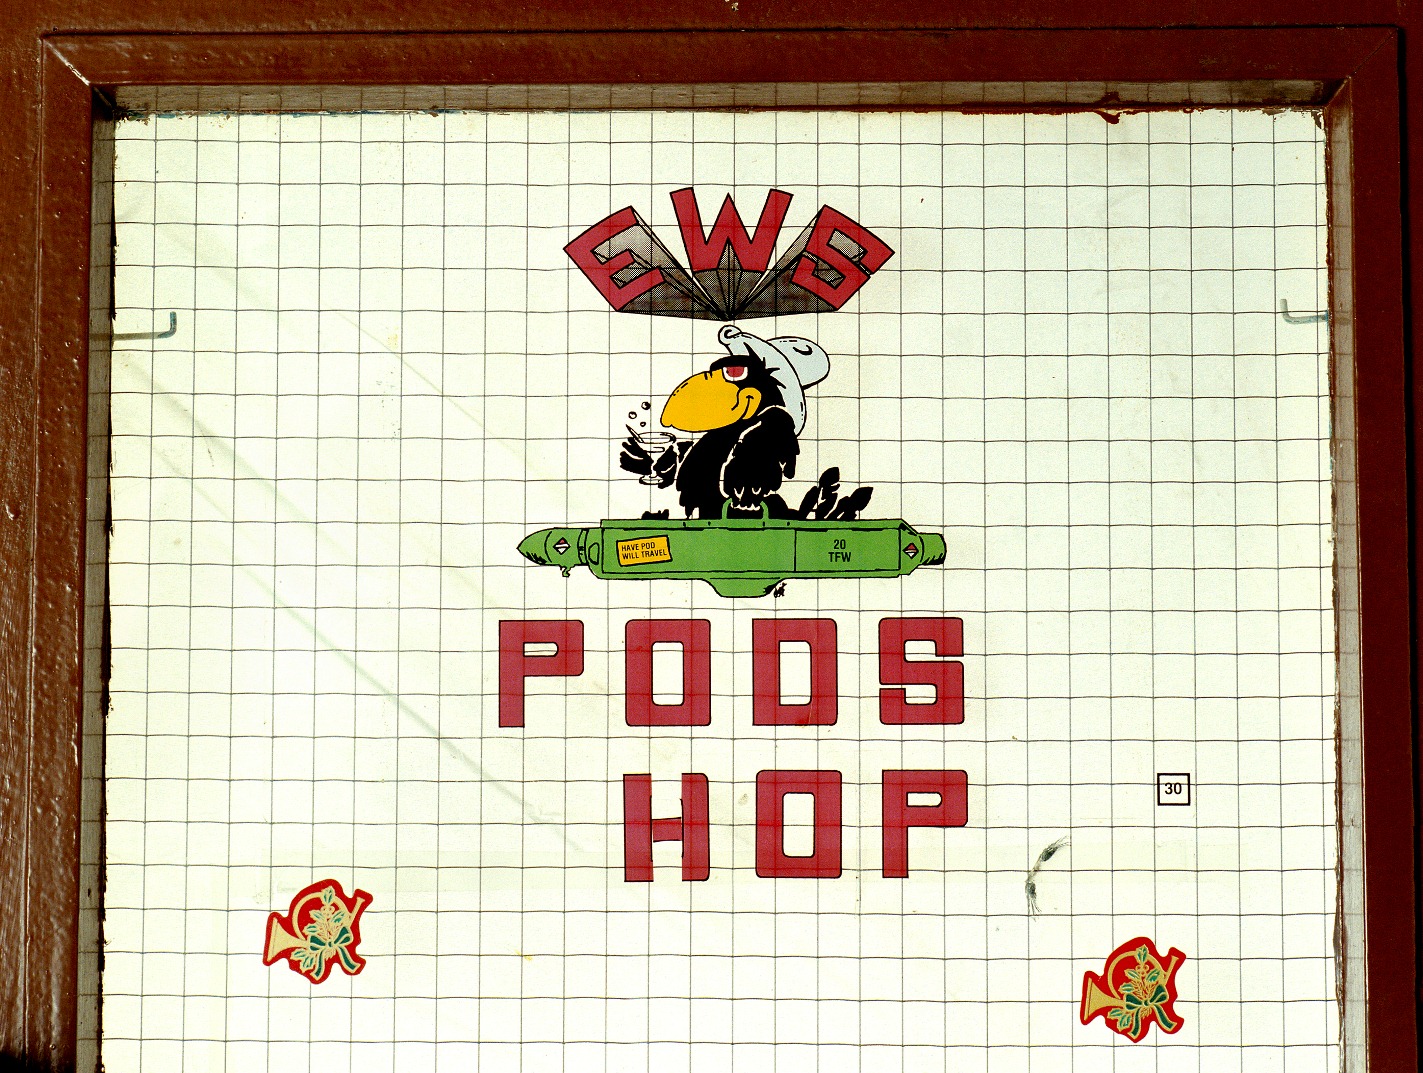 RAF Upper Heyford, Oxfordshire, cartoon on the workshop door of the Electronic Warfare Squadron, the cartoon raven references the nickname of the F111 aircraft.